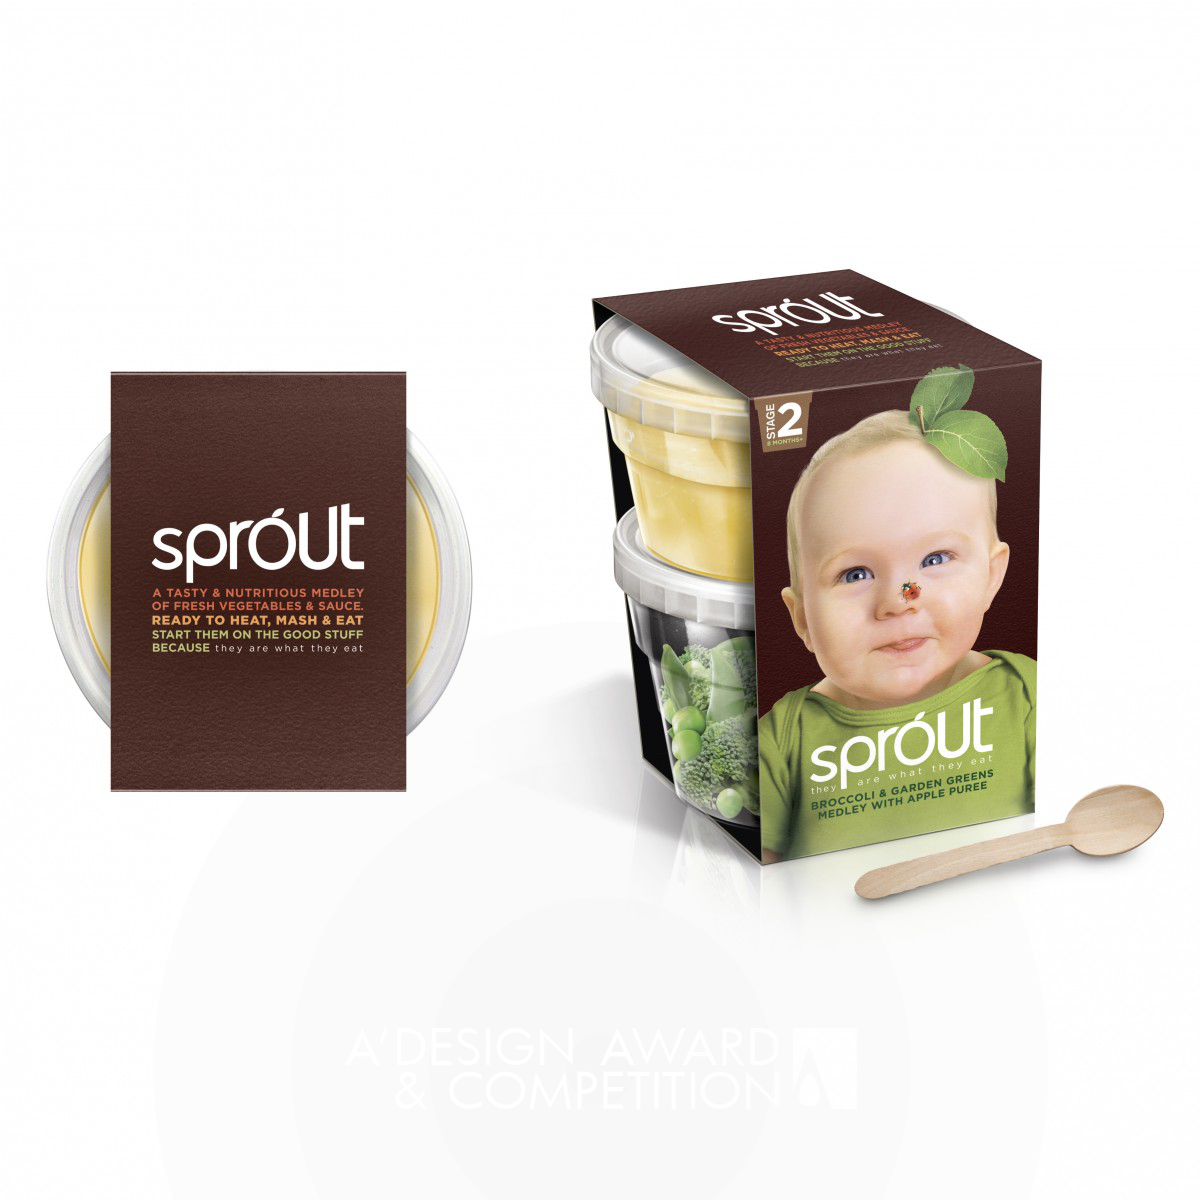 Sprout Baby food brand by Springetts Brand Design